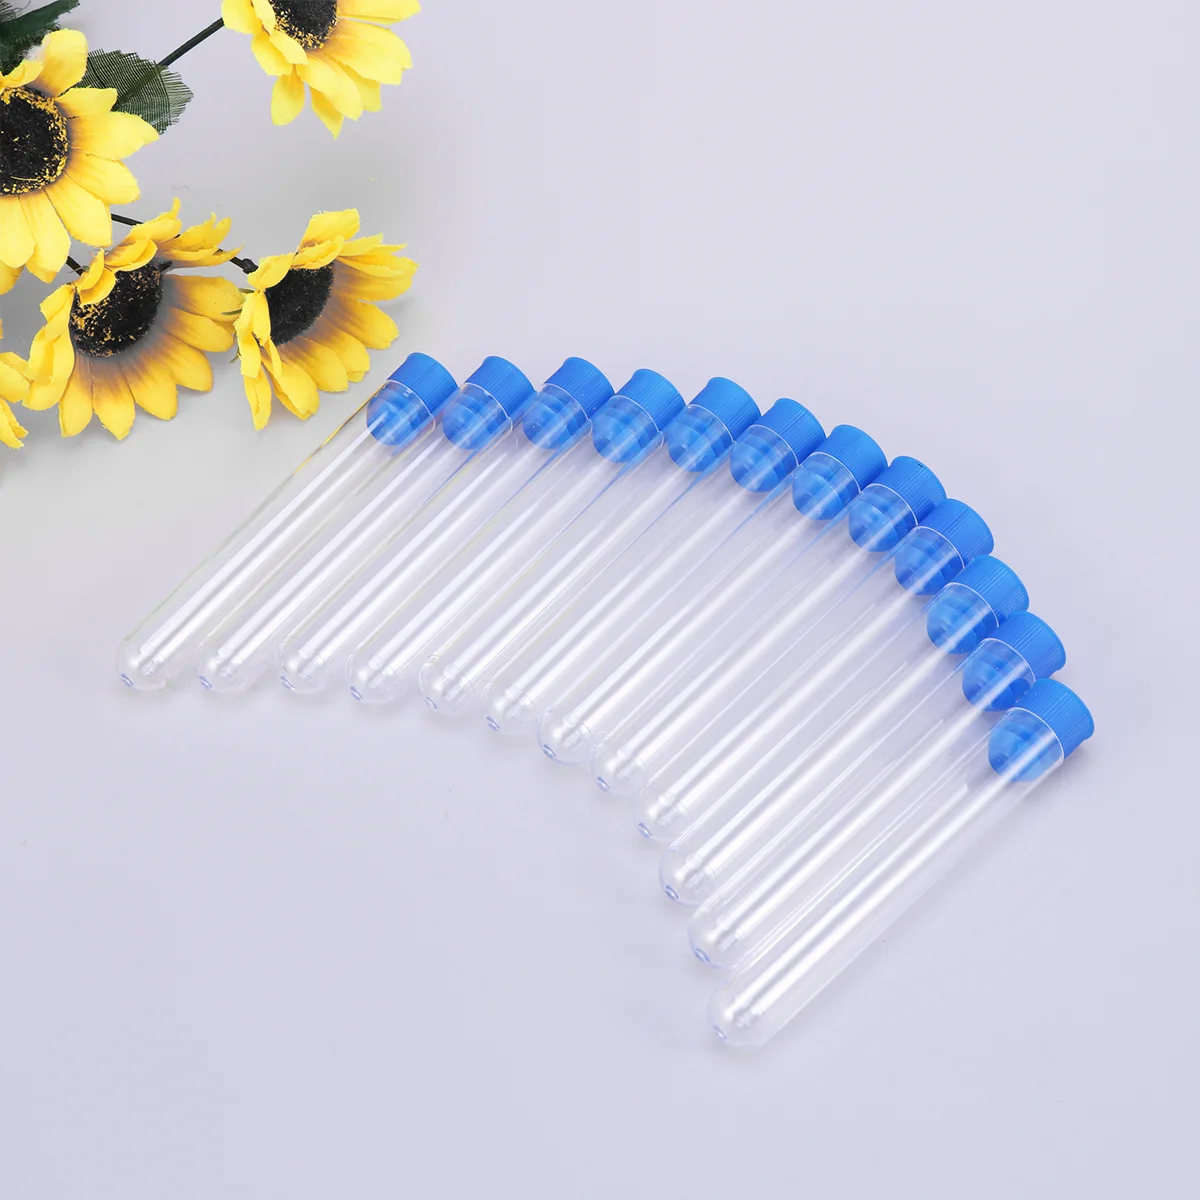 

12 Pcs/Pack 16x150mm Plastic Clear Test Tube with Stopper for Scientific Experiments Party Candy Storage with Stopper (Random